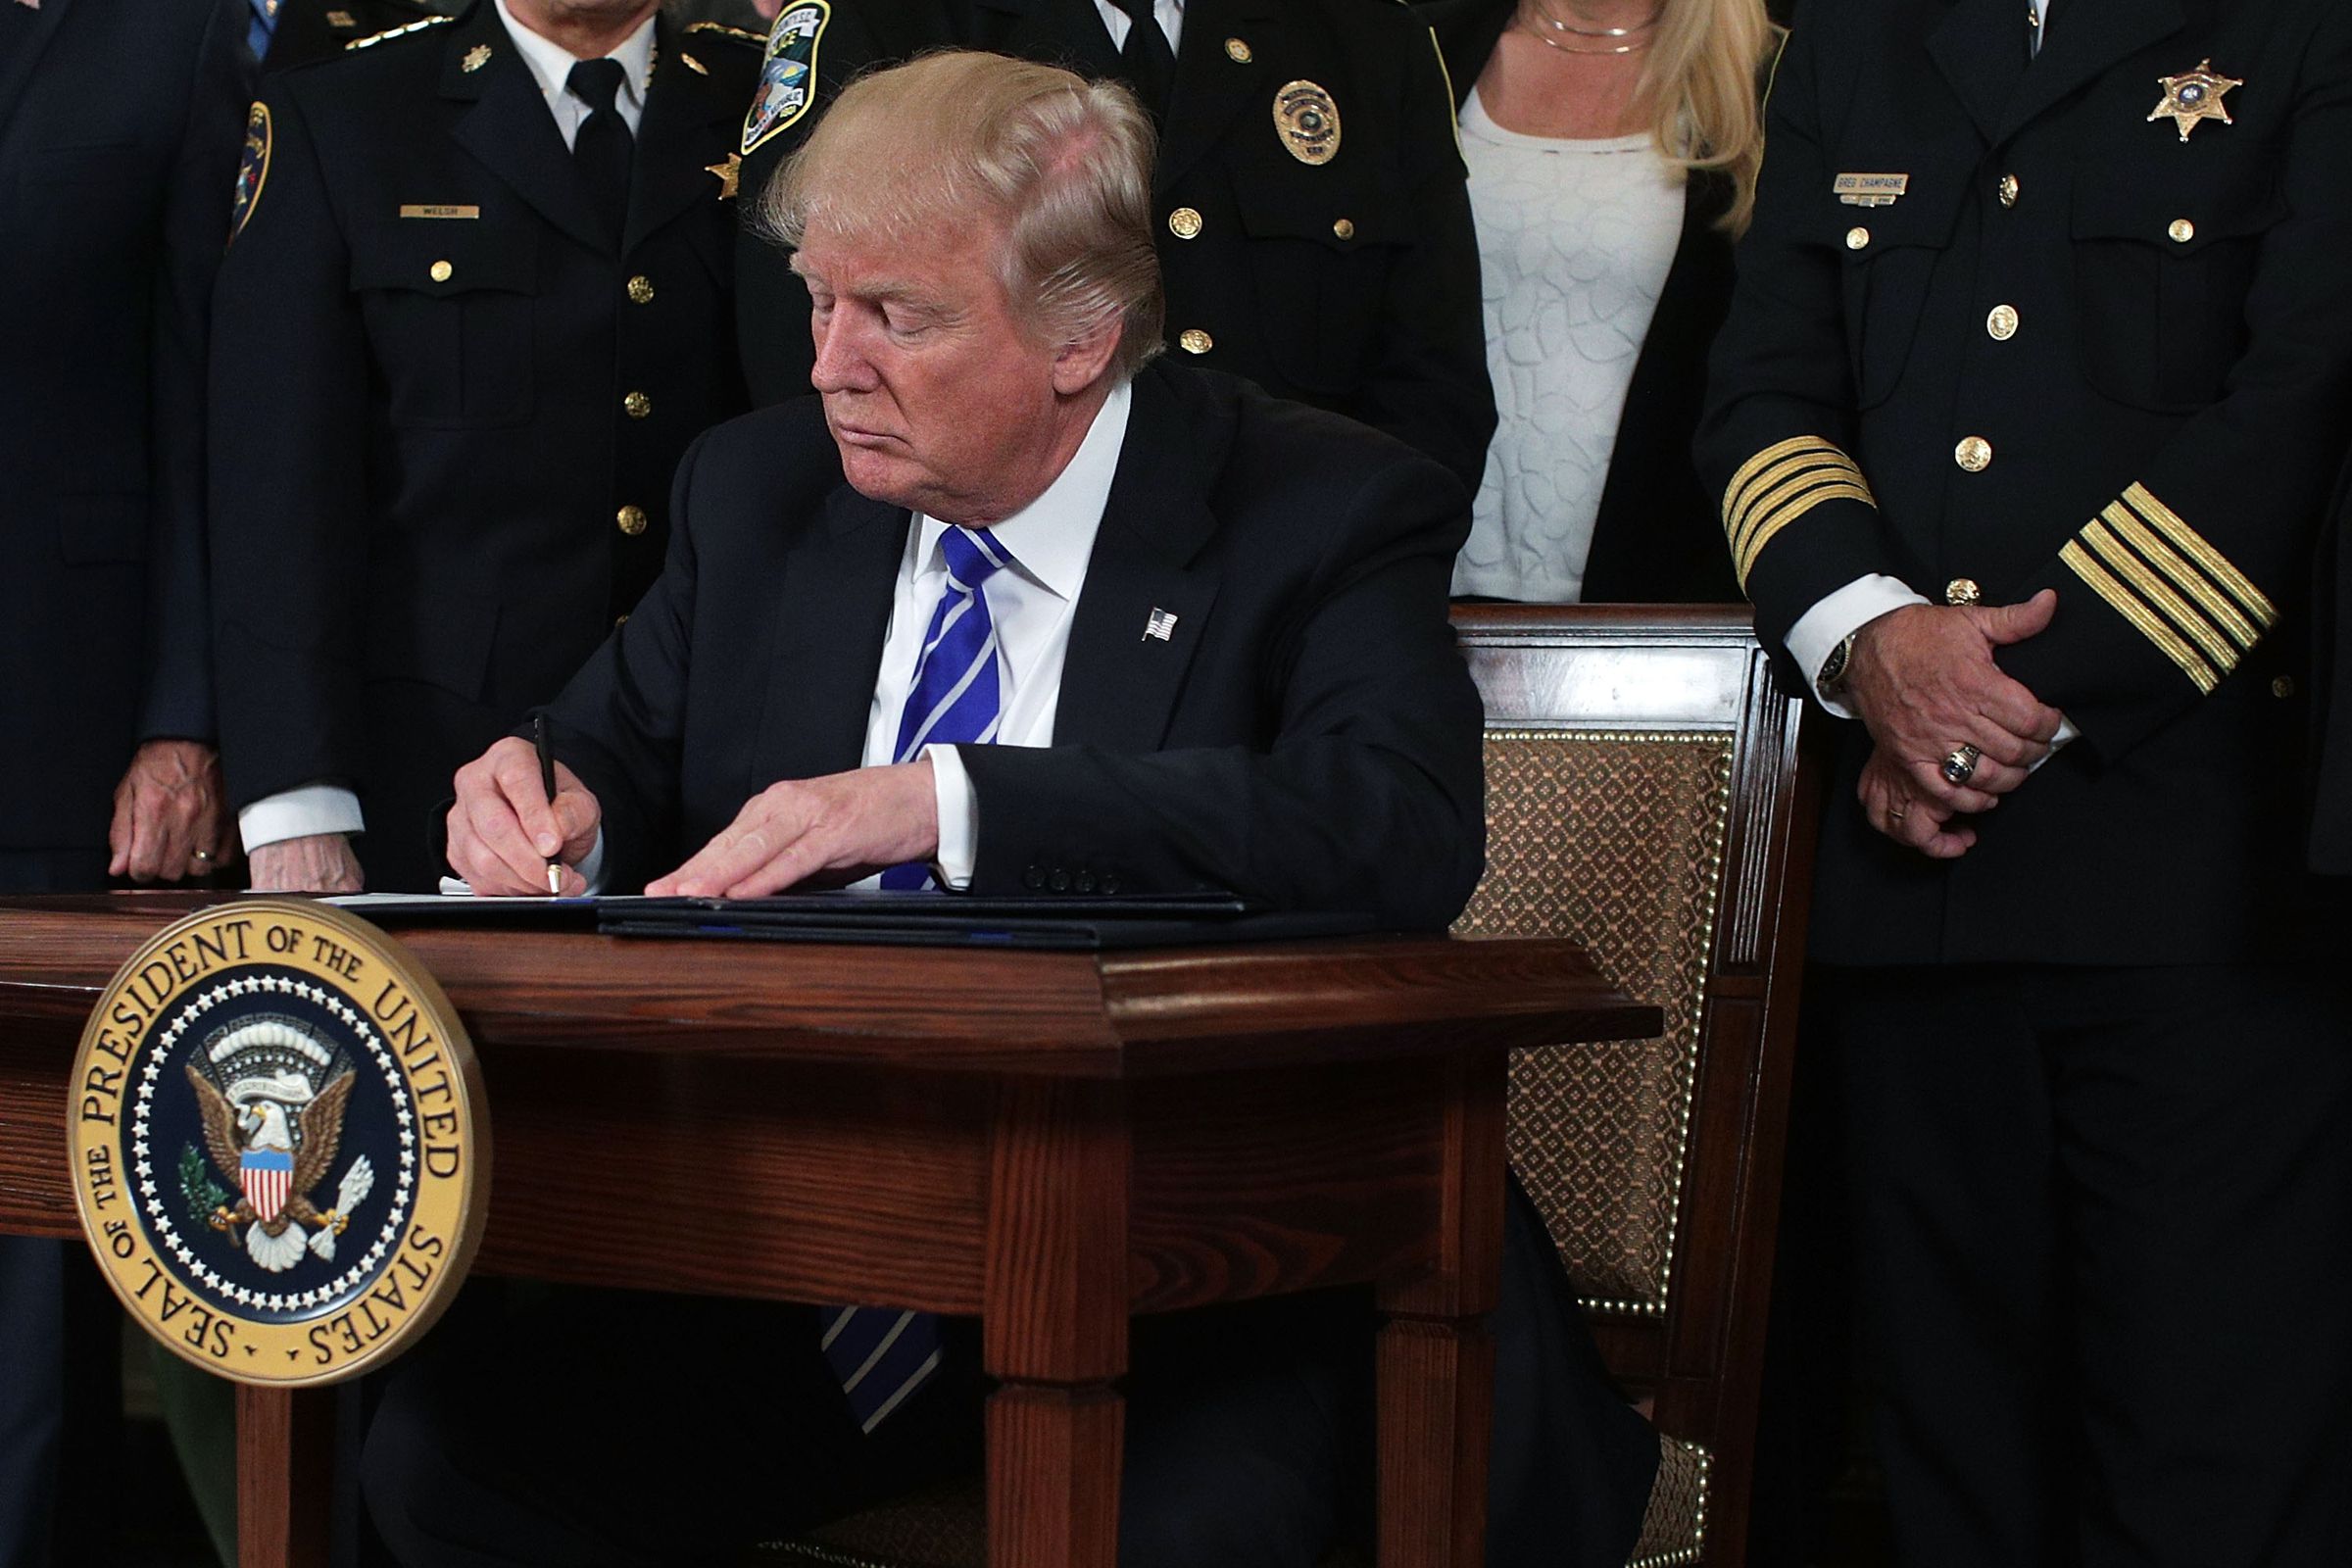 President Donald Trump Signs Bills At The White House